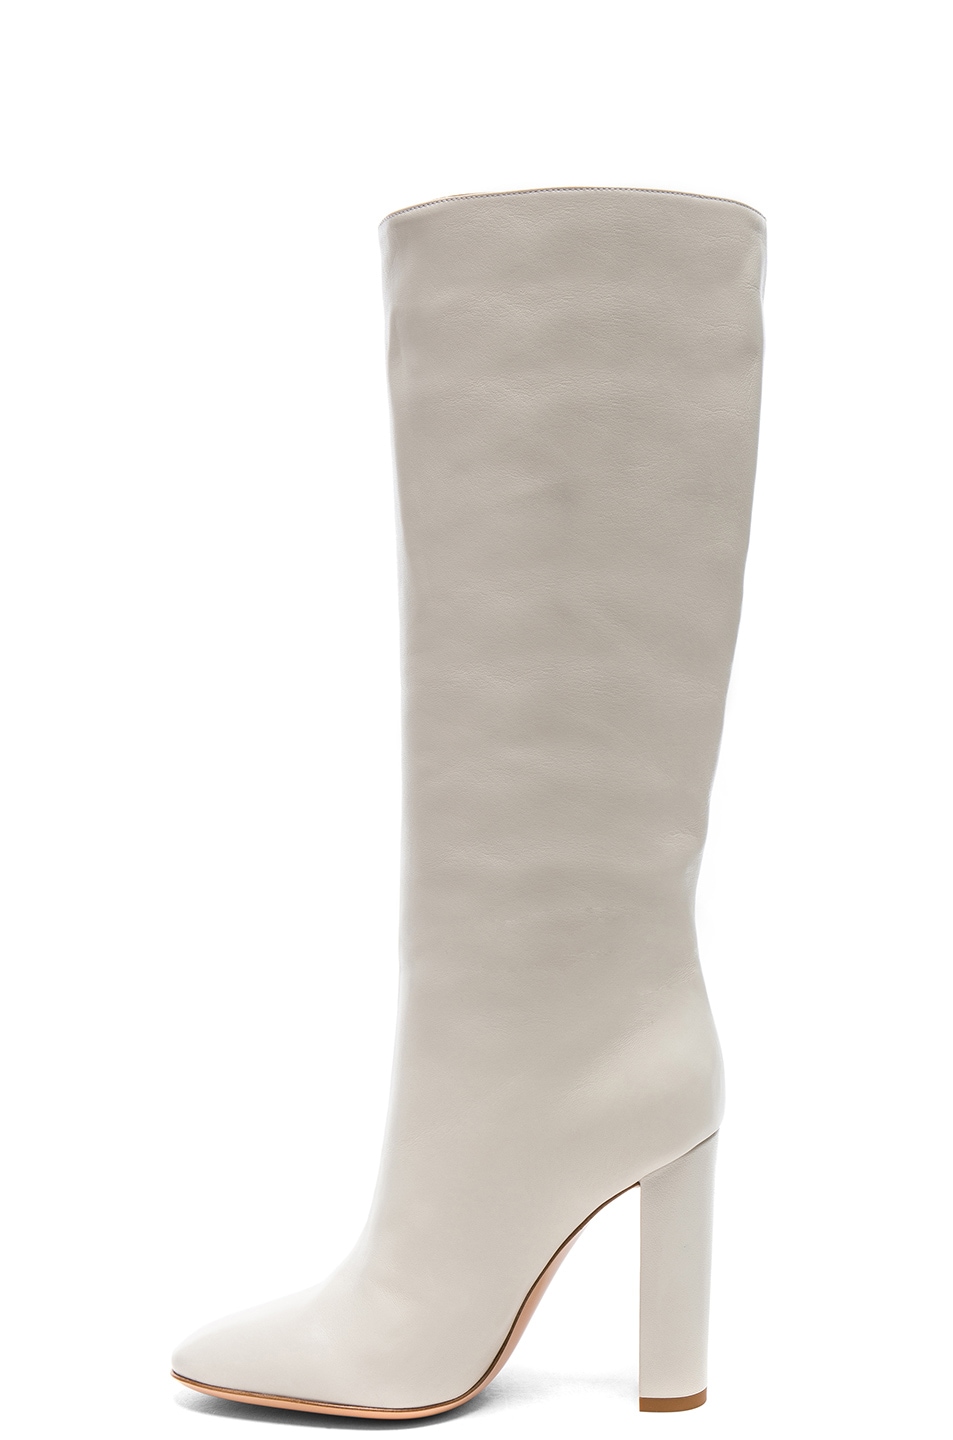 Gianvito Rossi Leather Laura Knee High Boots in Off White | FWRD